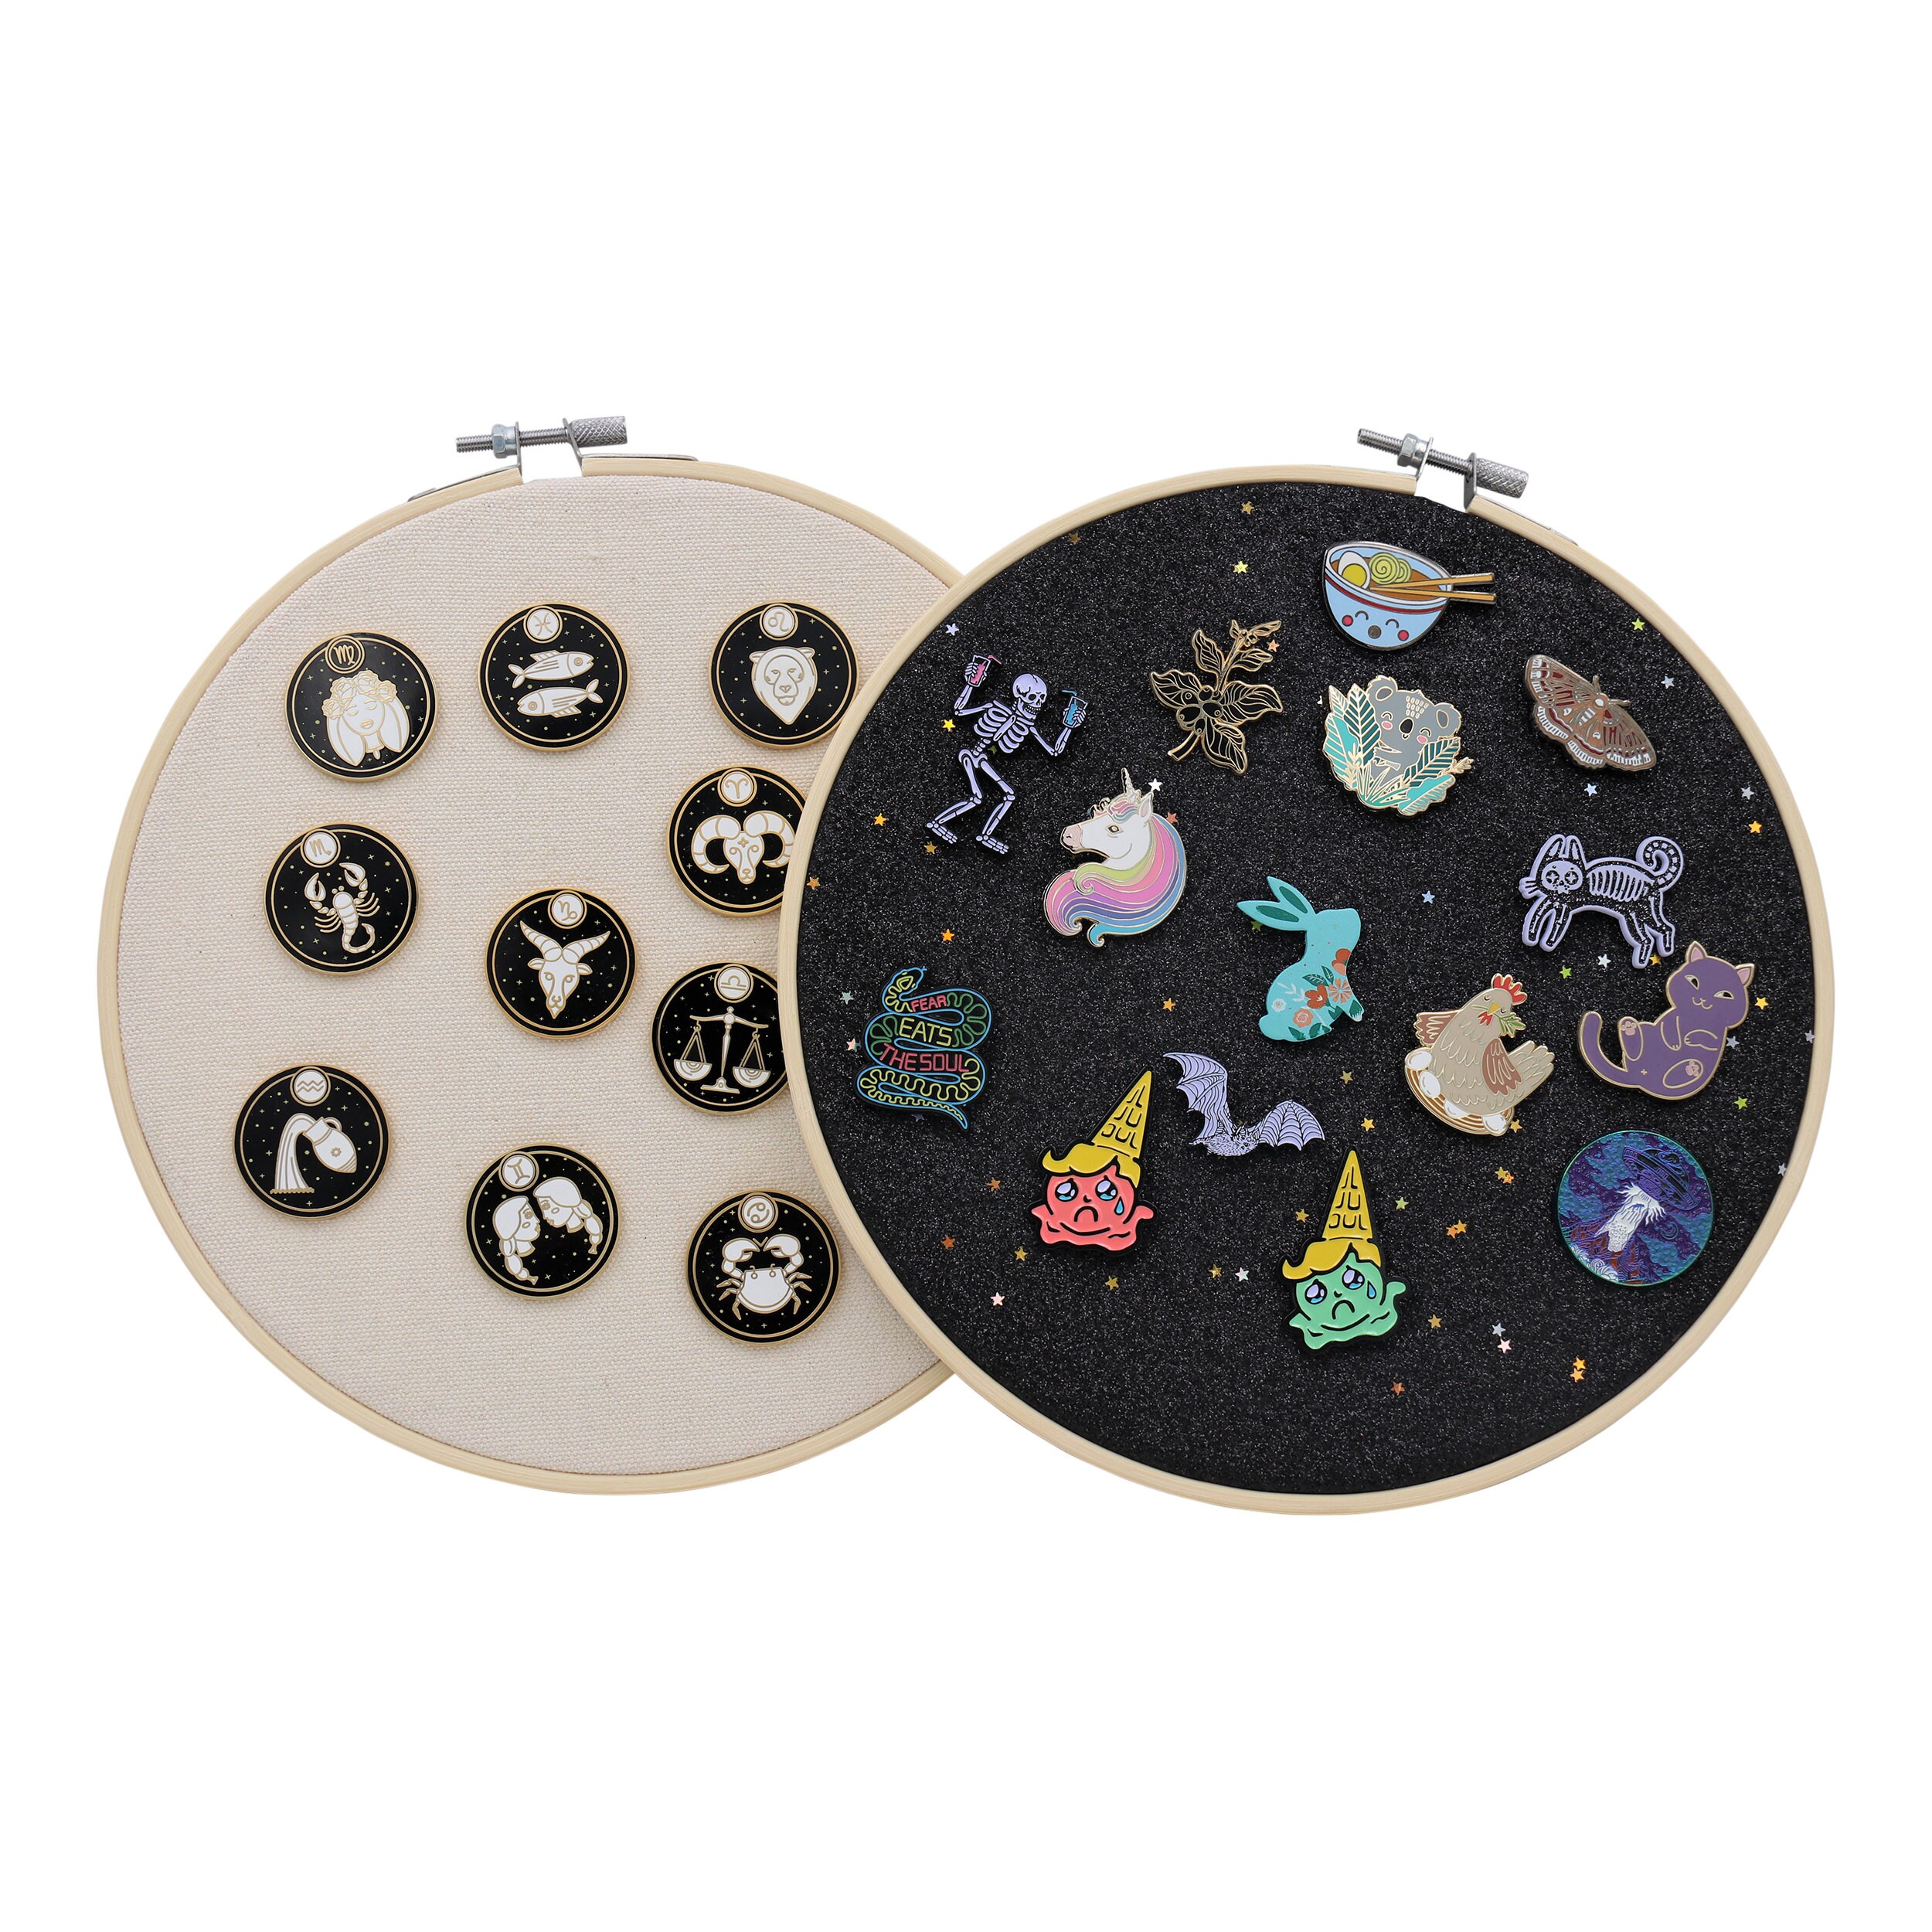 Up-12 inch embroidery hoop